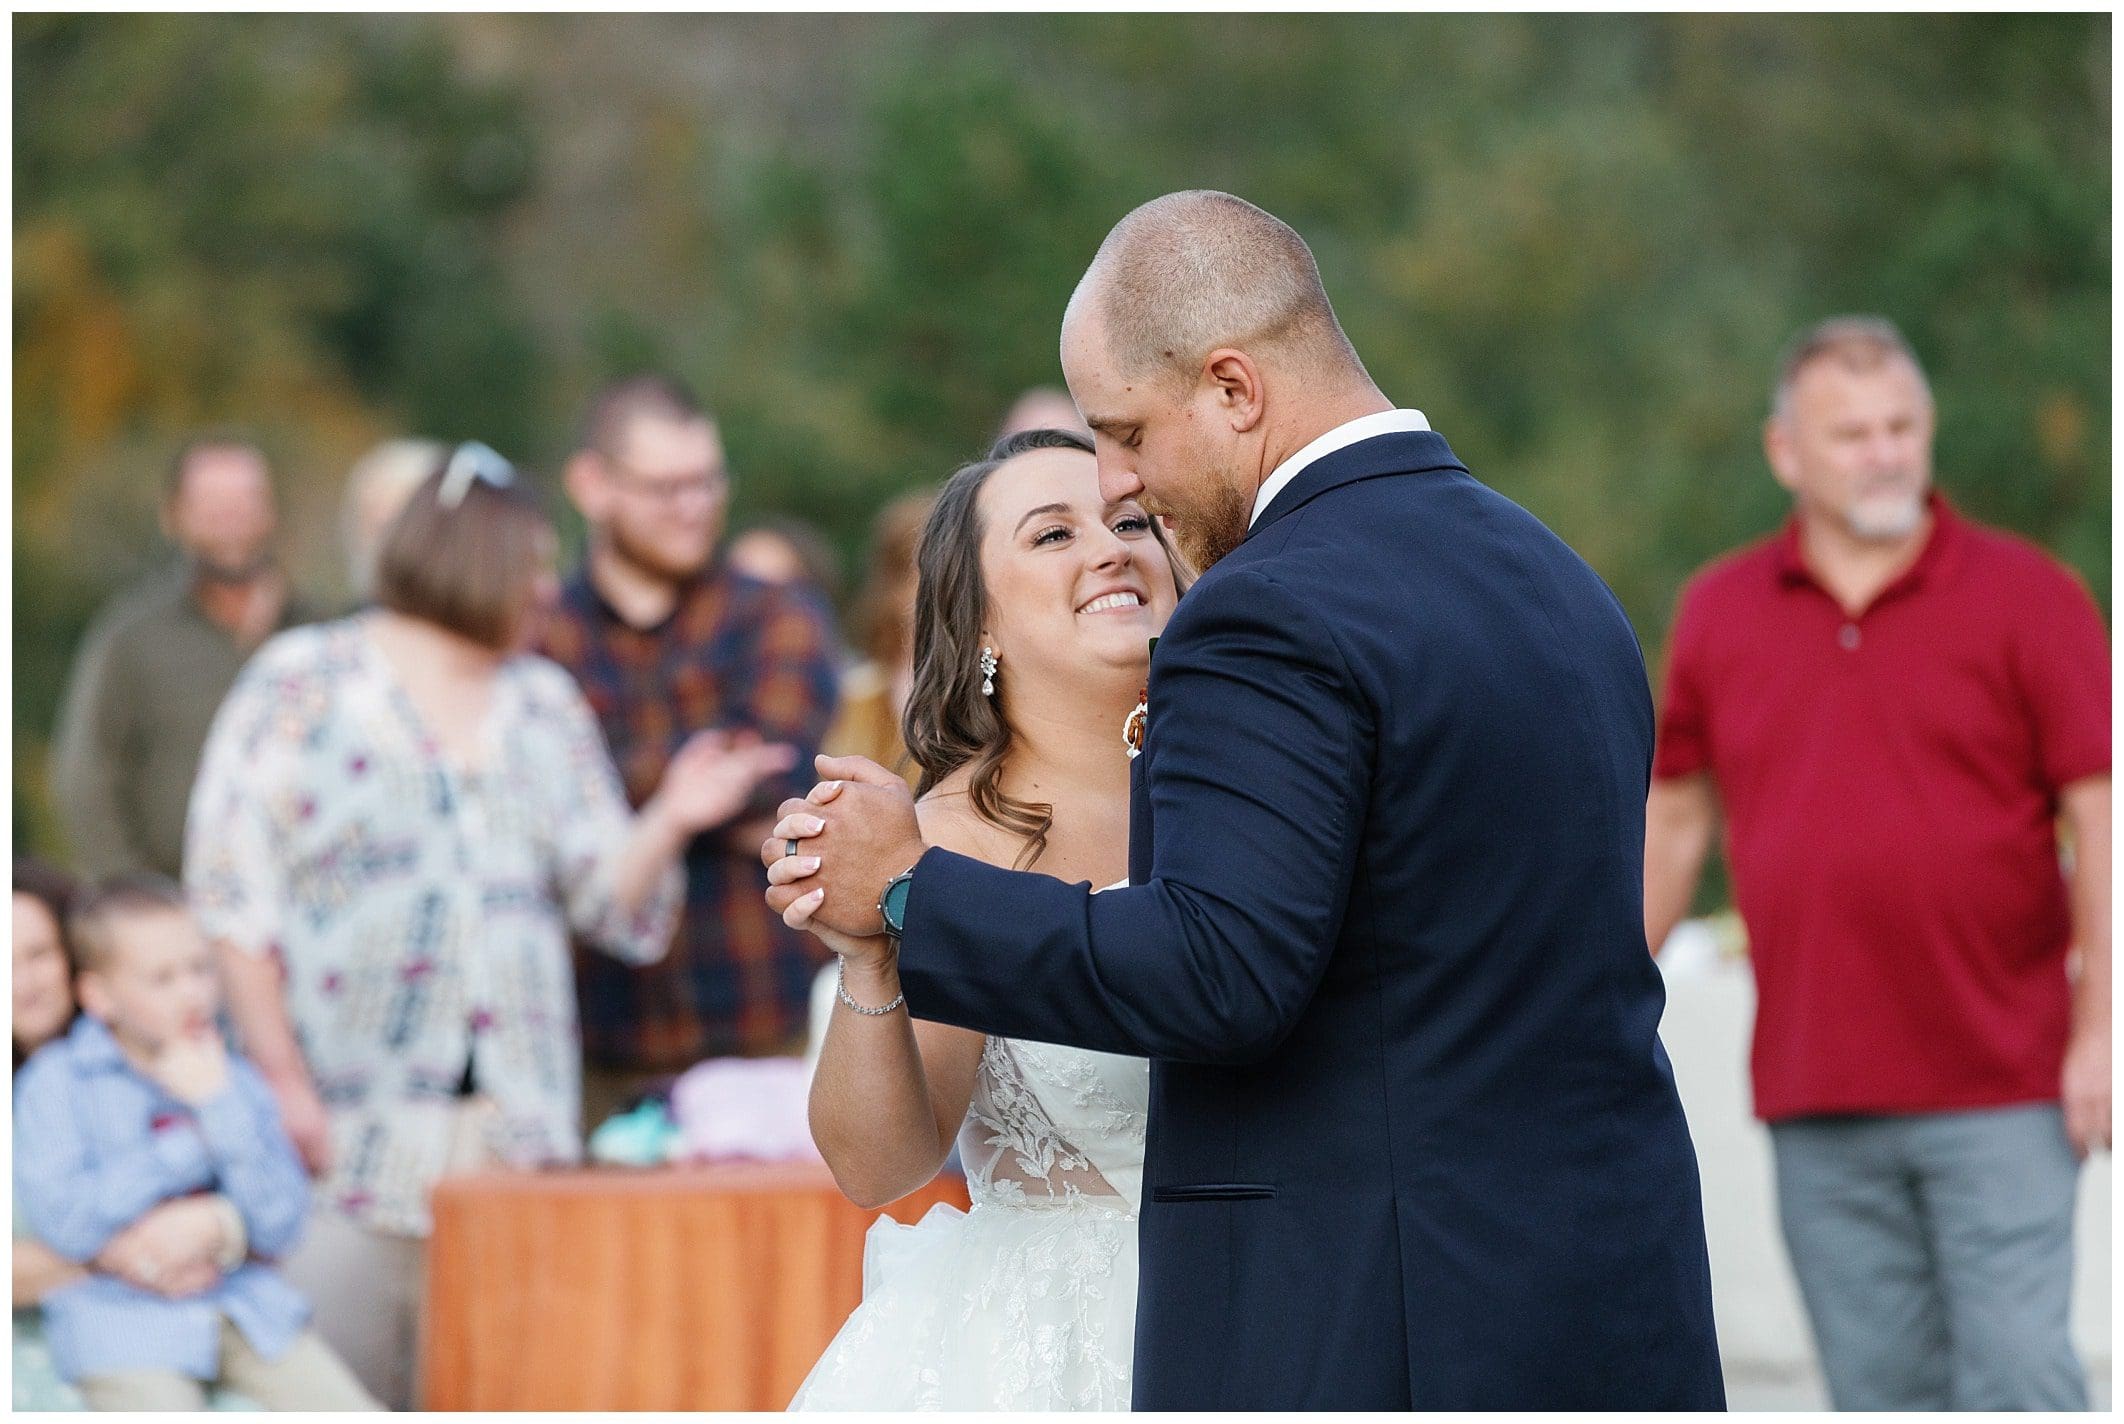 Couple shares first dance outdoors